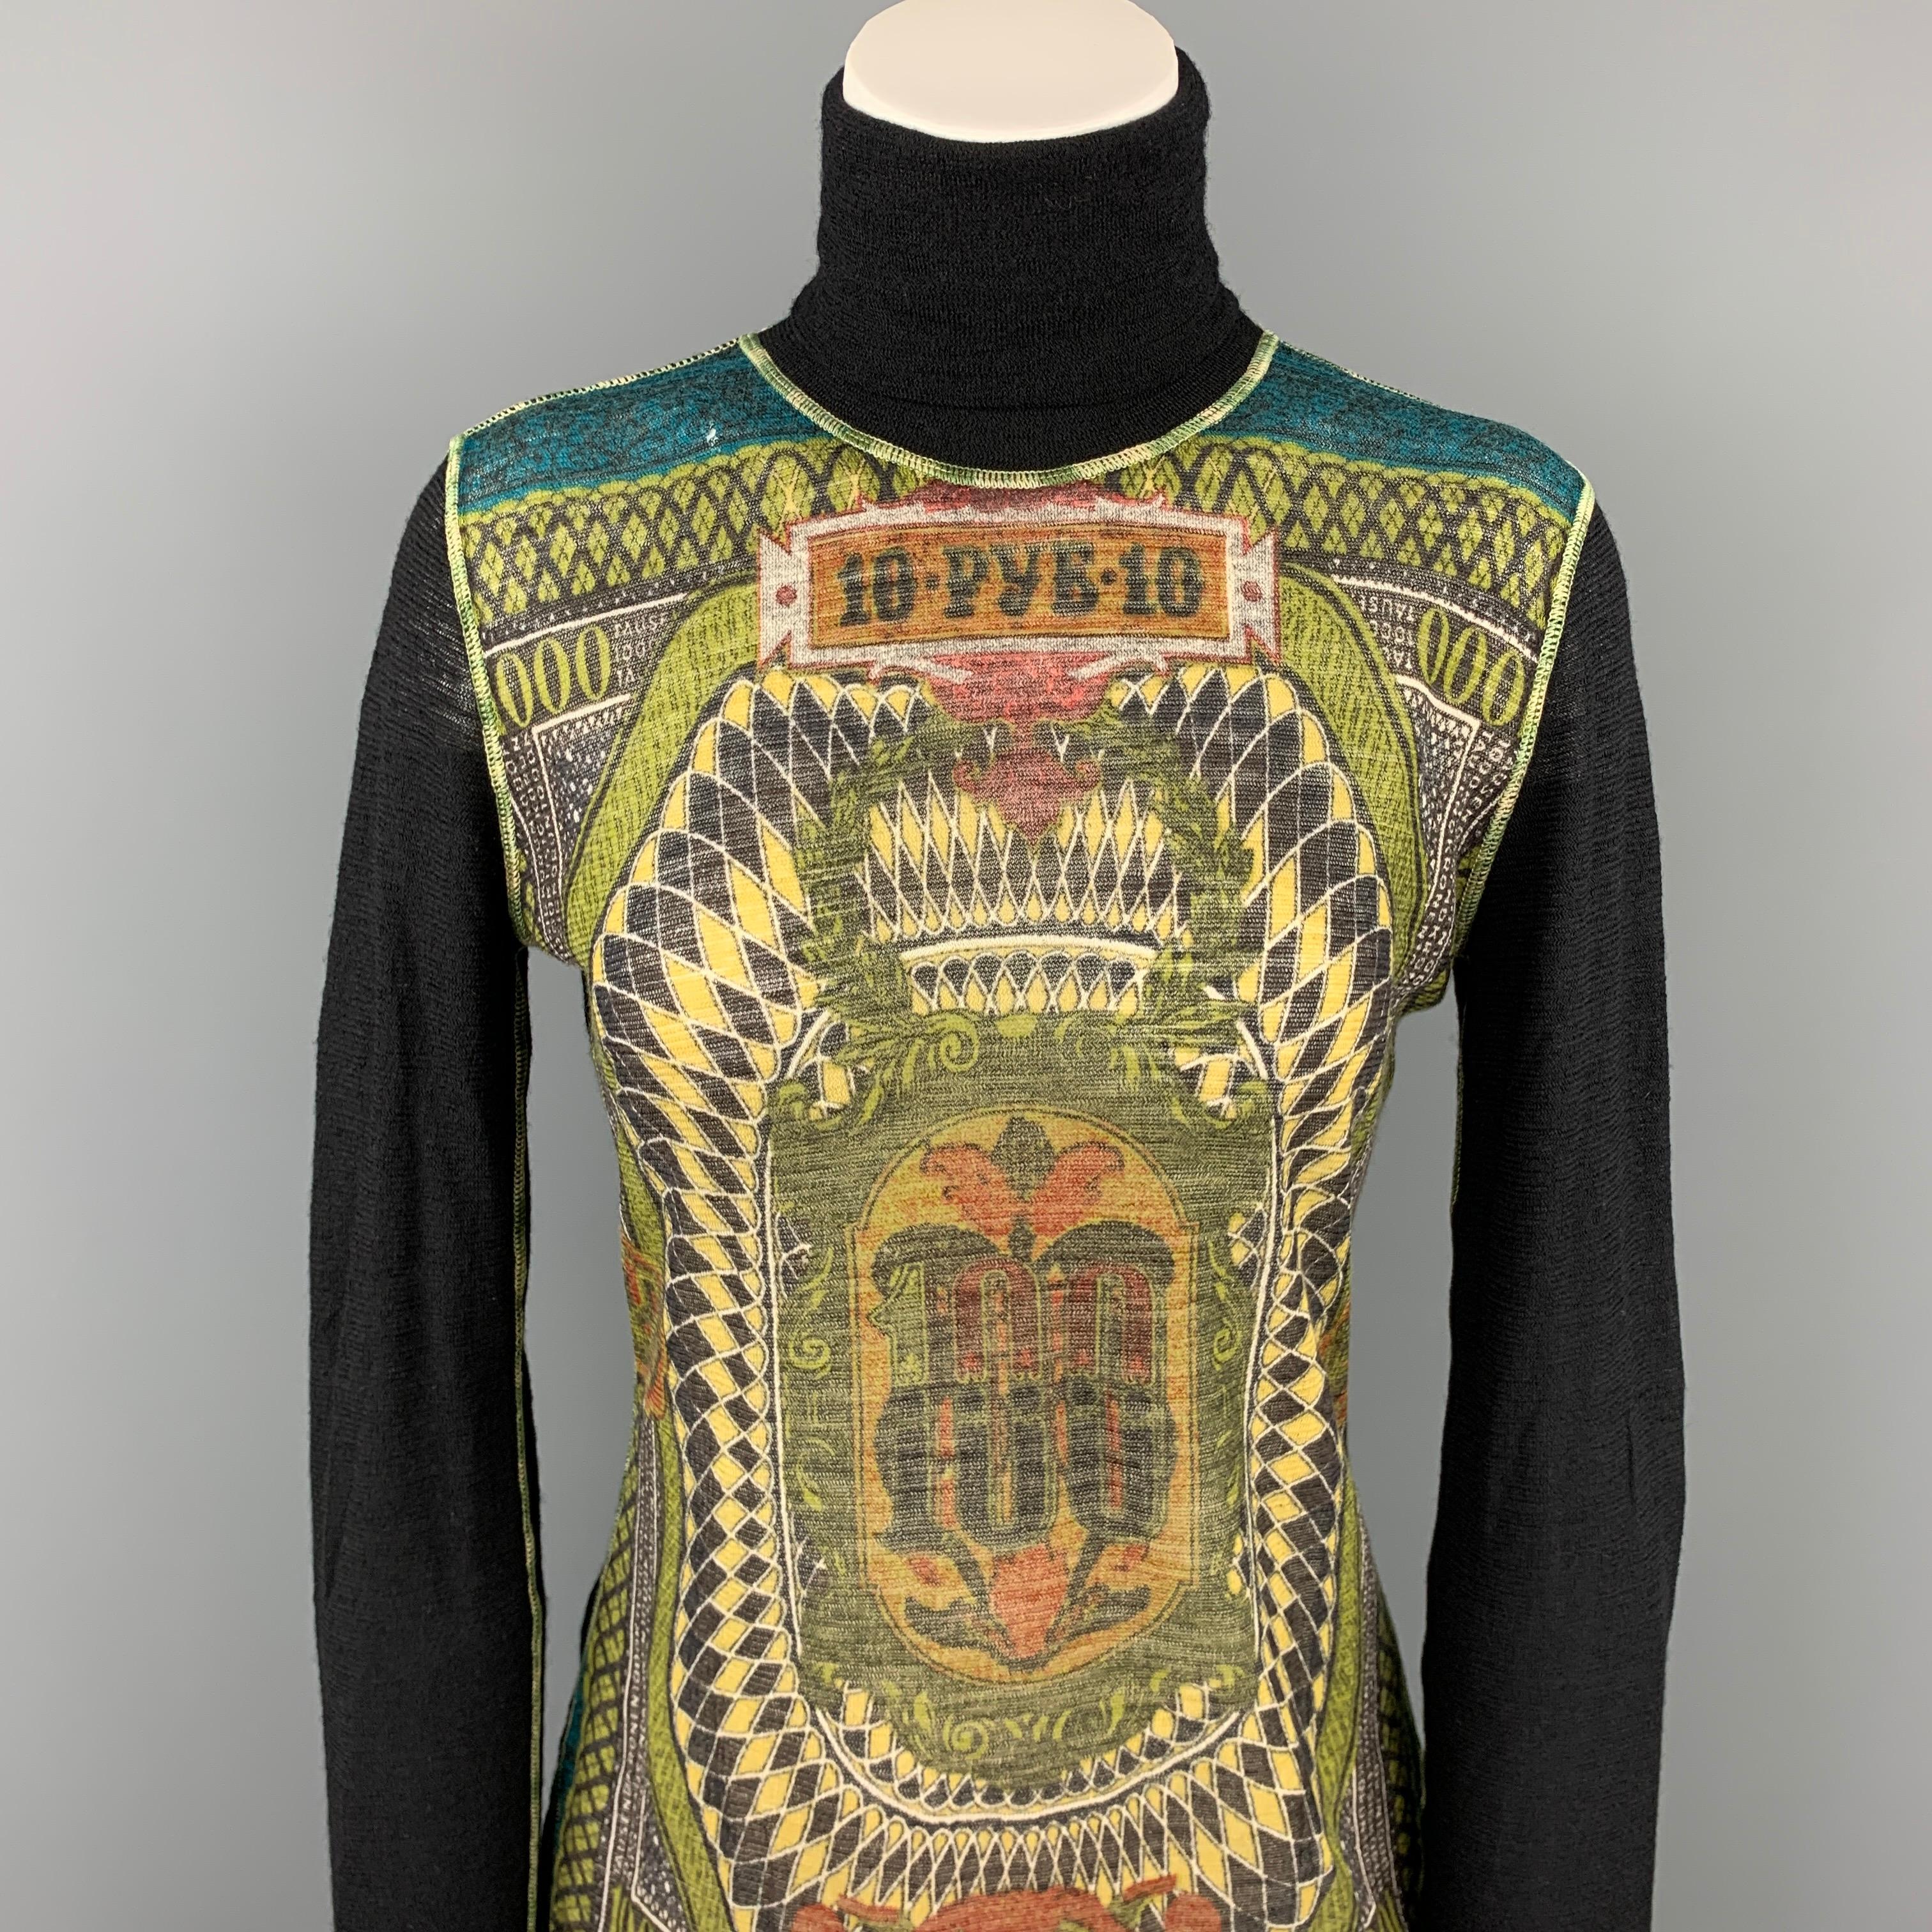 JEAN PAUL GAULTIER x BERGDORF GOODMAN pullover comes in a black & multi-color abstract print design wool featuring a turtleneck style. Made in Italy.

Good Pre-Owned Condition.
Marked: L

Measurements:

Shoulder: 16.5 in.
Bust: 36 in.
Sleeve: 28